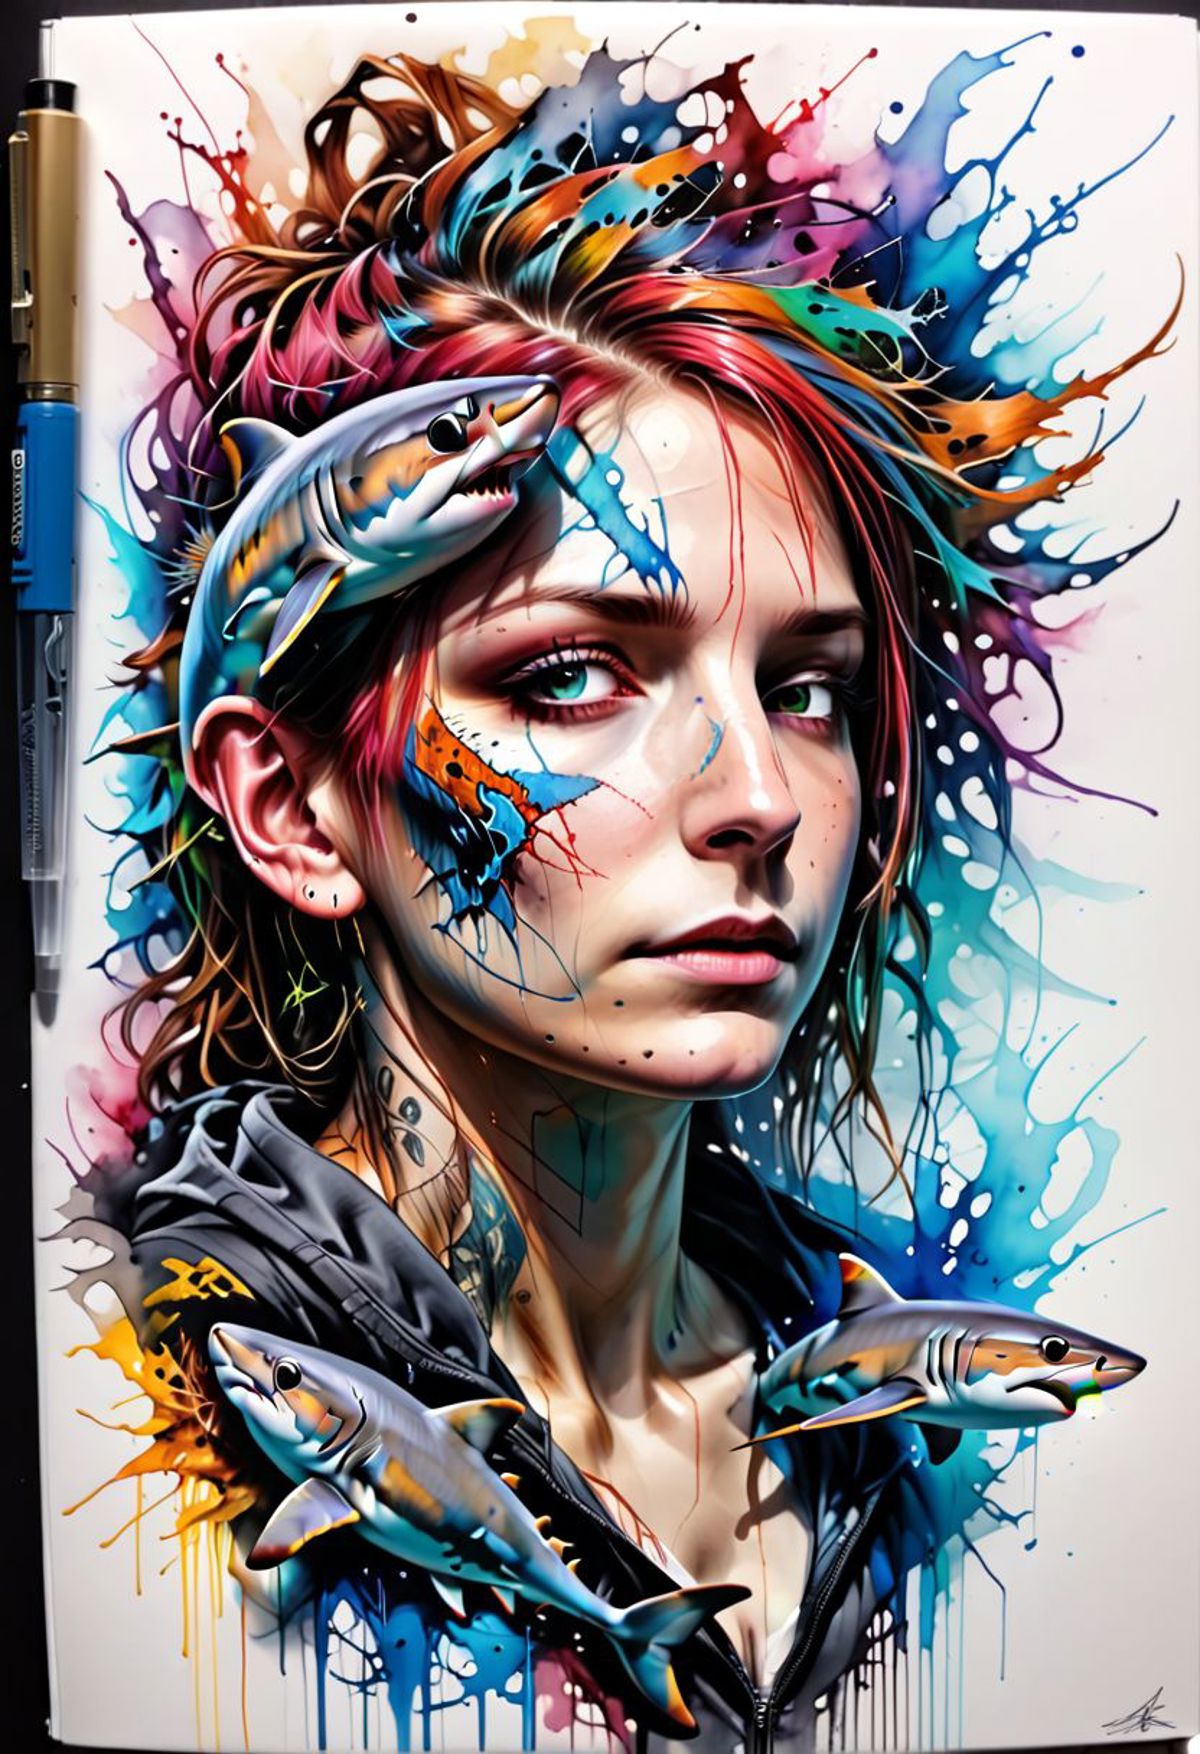 Carne Griffiths XL Style LoRa image by spam57057549